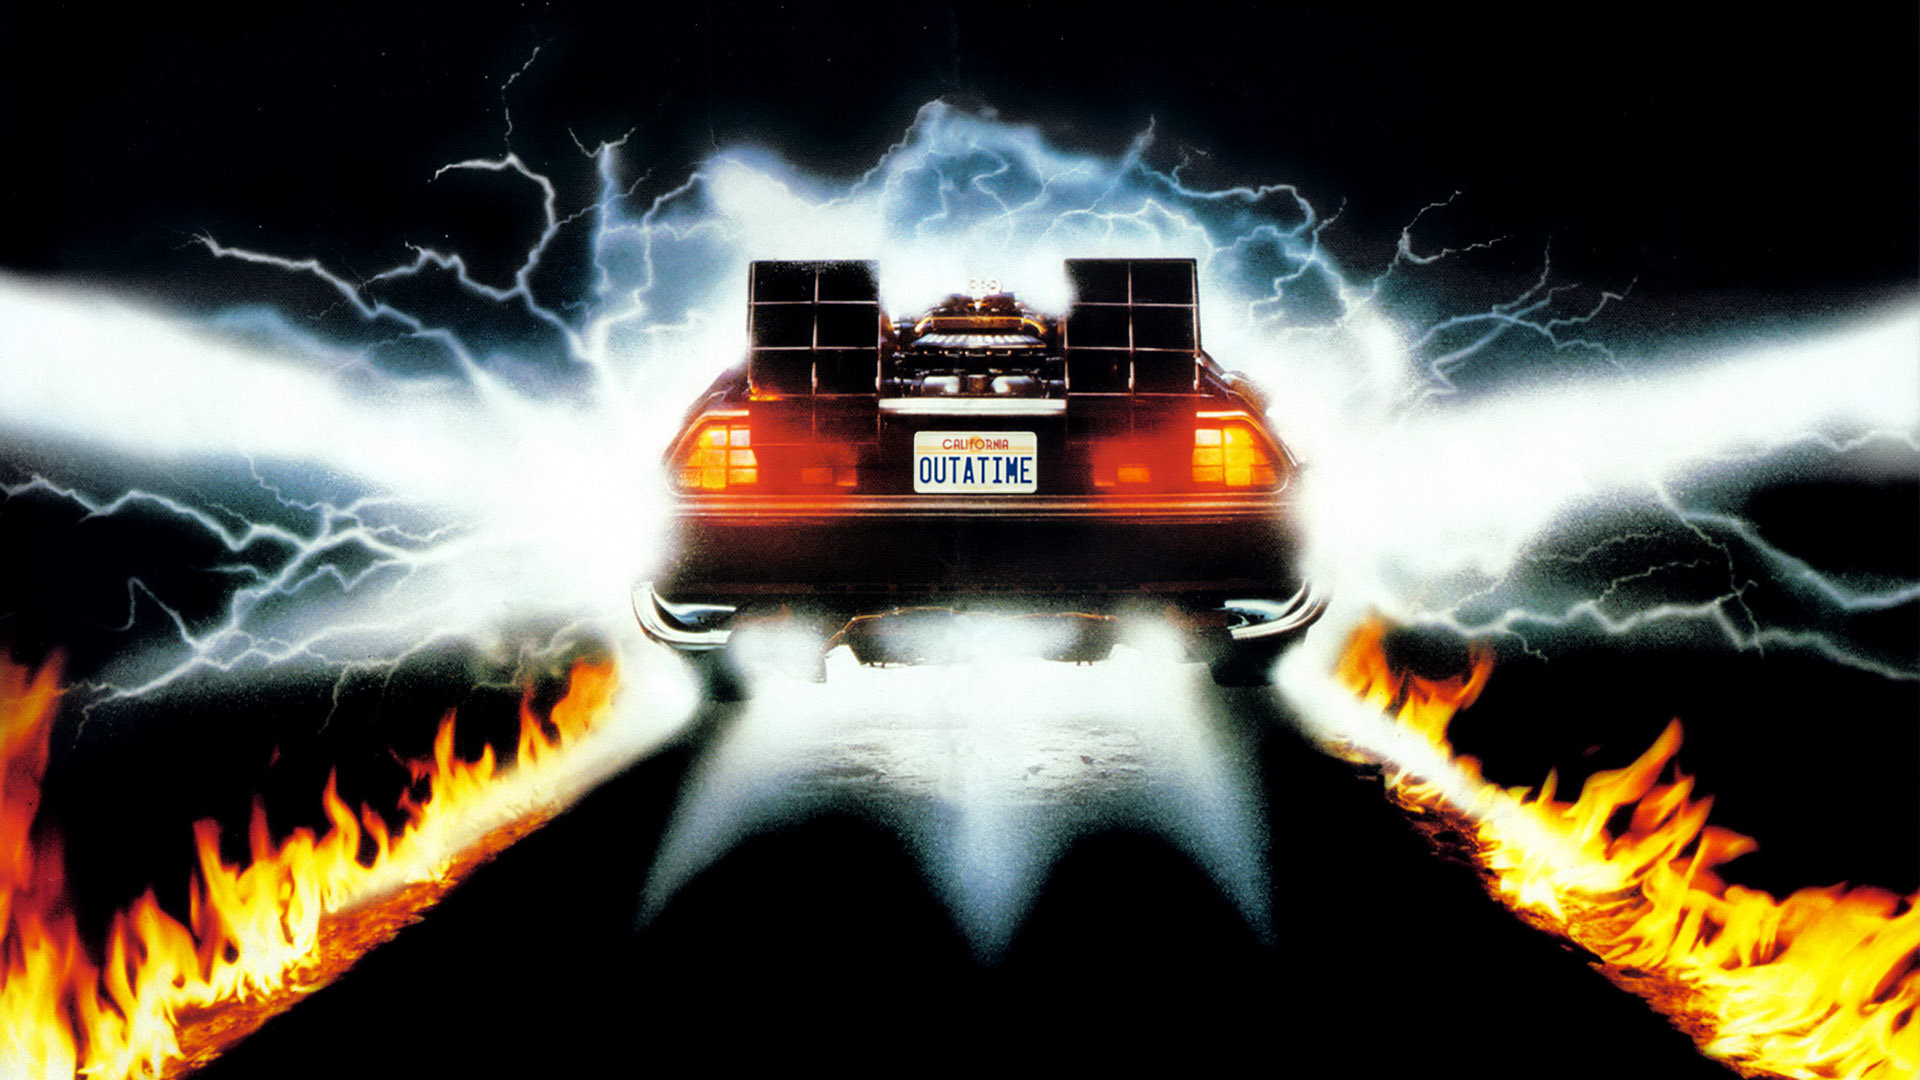 When "Back to the Future" was first screened in front of a test audience with no hint of the plot before hand, the room grew uncomfortable in the few first minutes because they initially believed Doc Brown incinerated his dog in the DeLorean